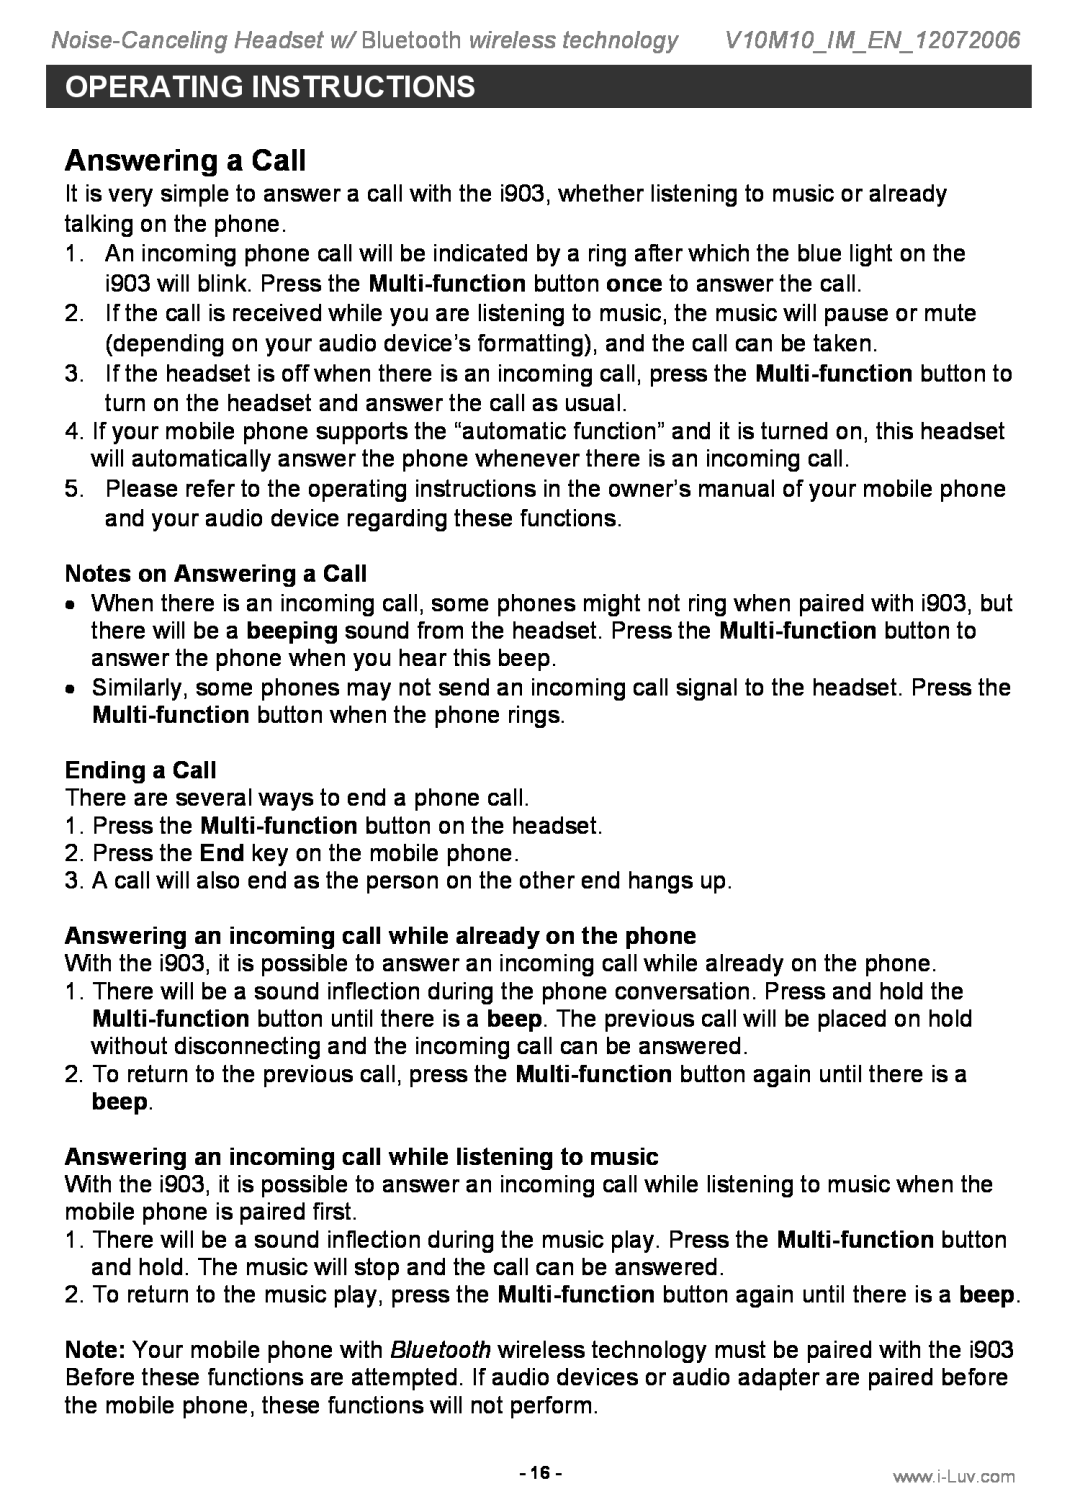 Jwin i903 instruction manual Notes on Answering a Call, Ending a Call, Operating Instructions 